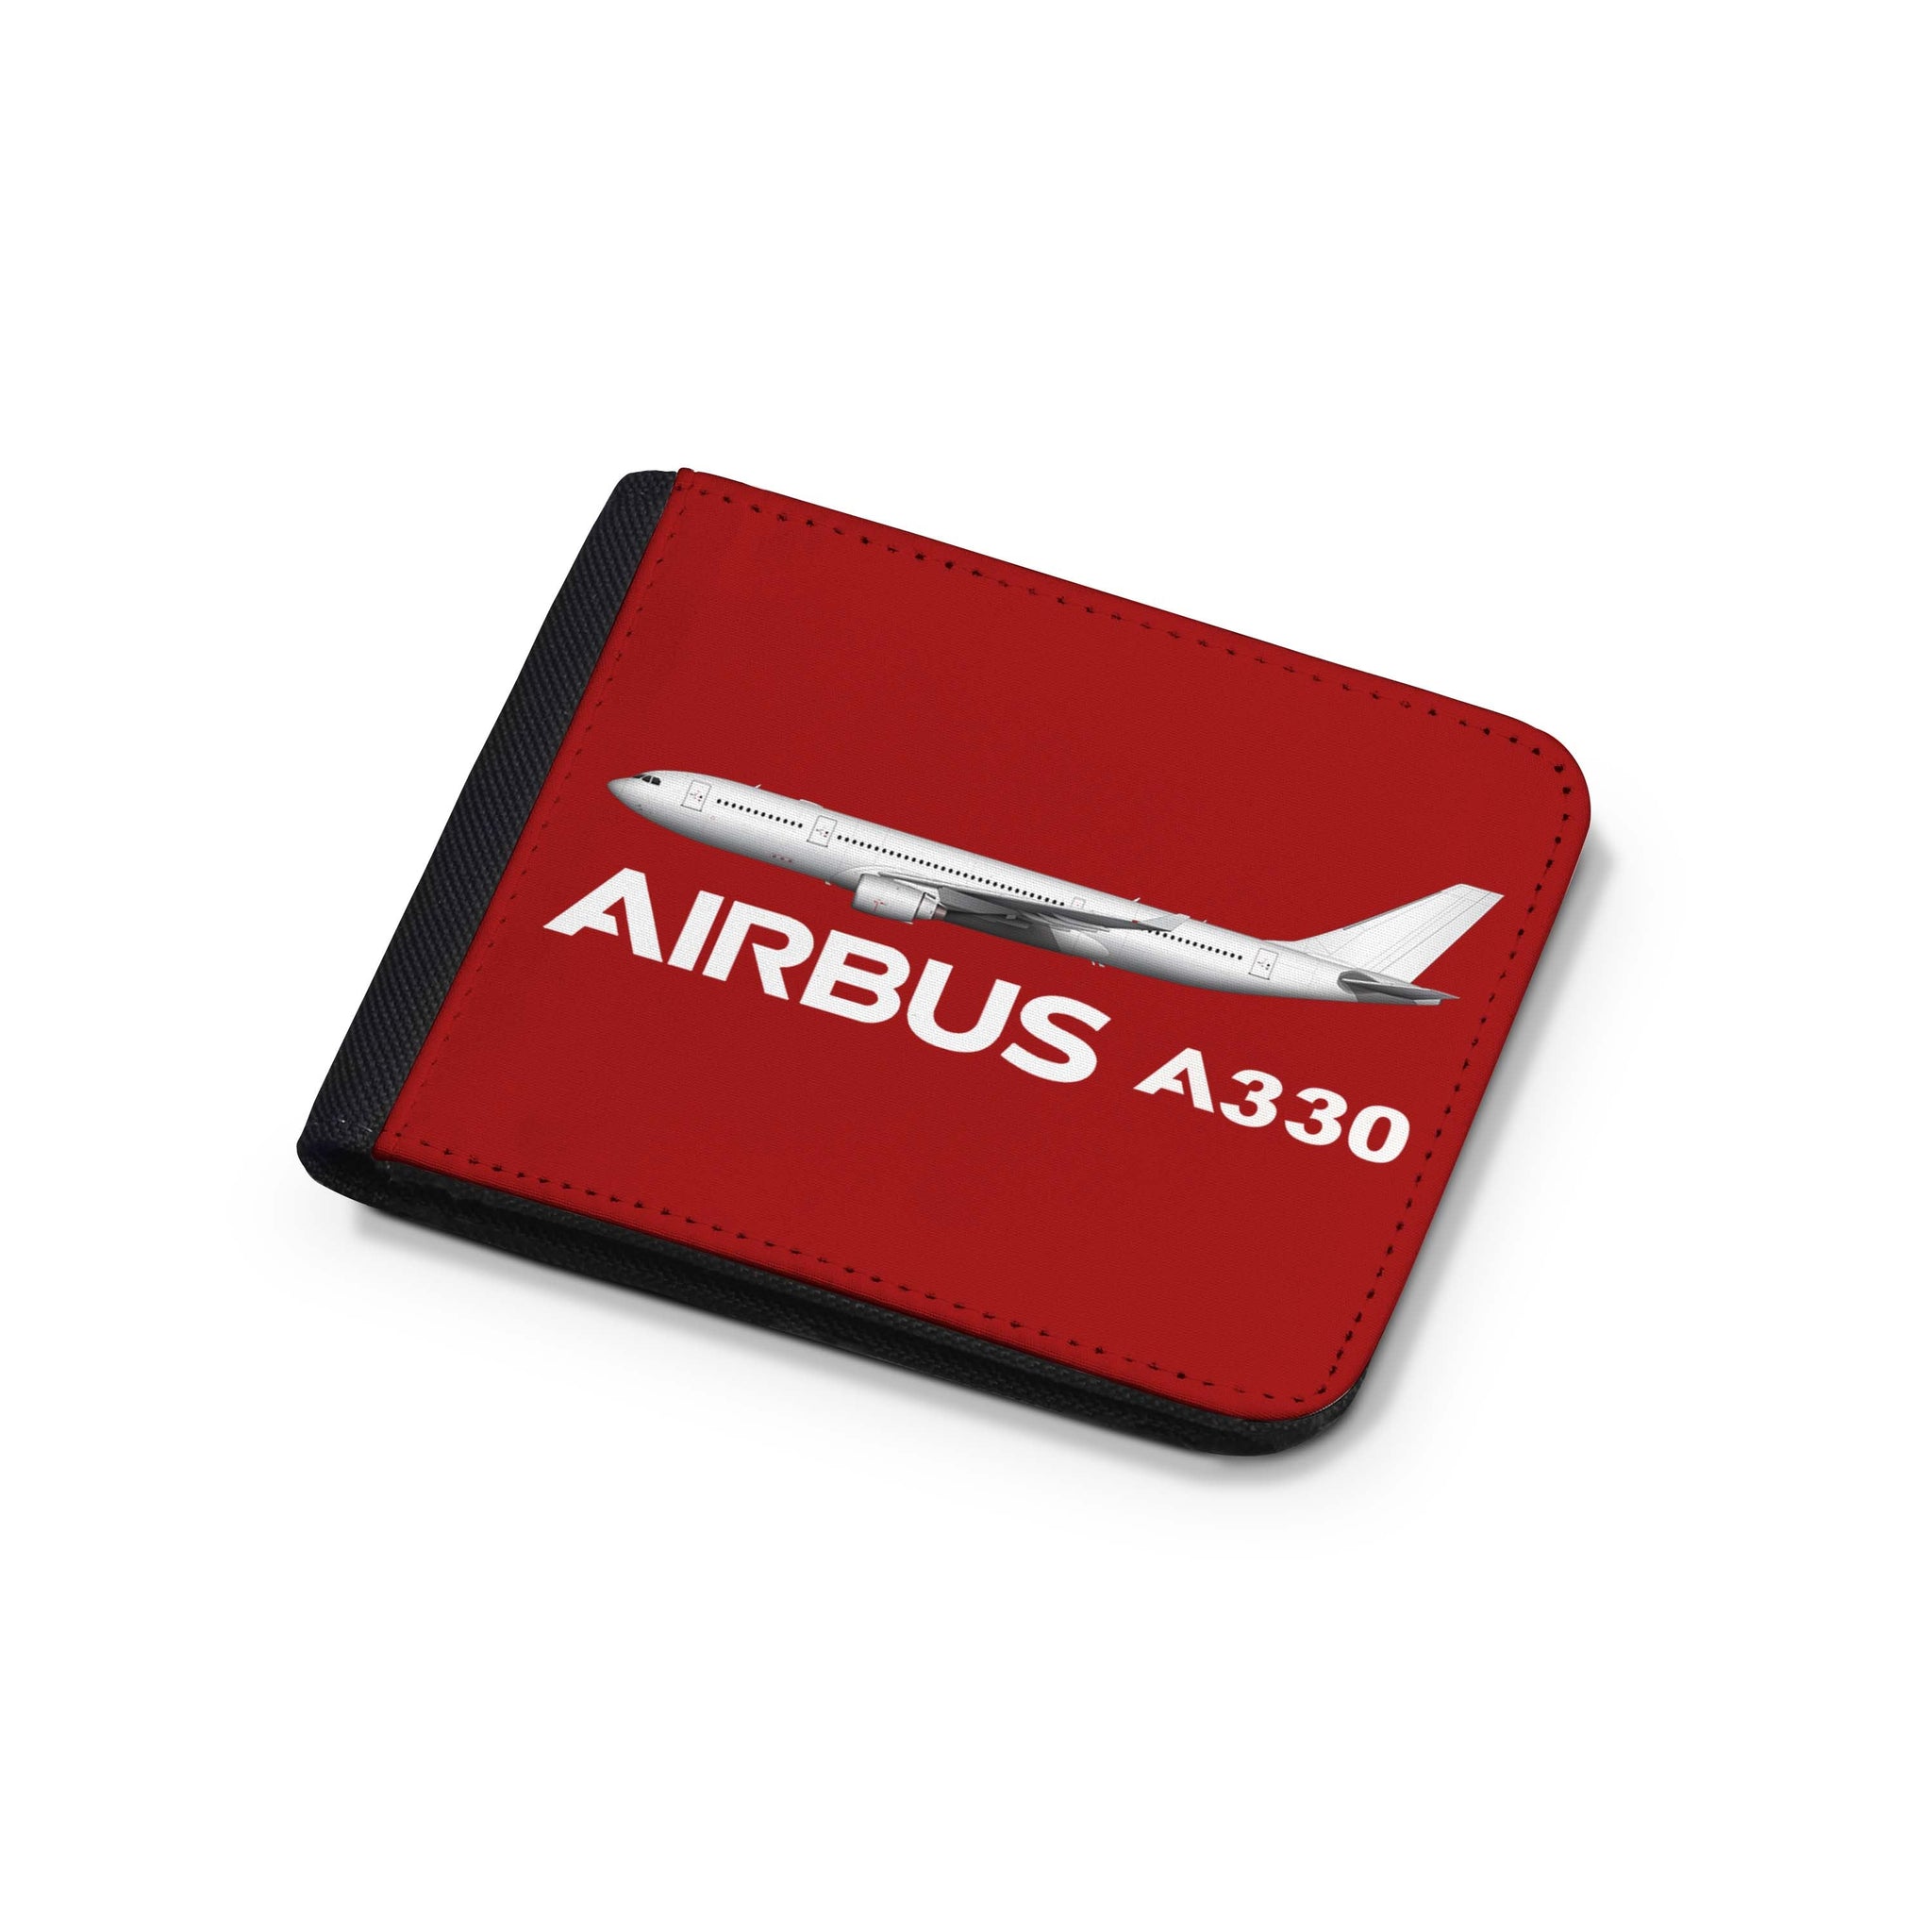 The Airbus A330 Designed Wallets